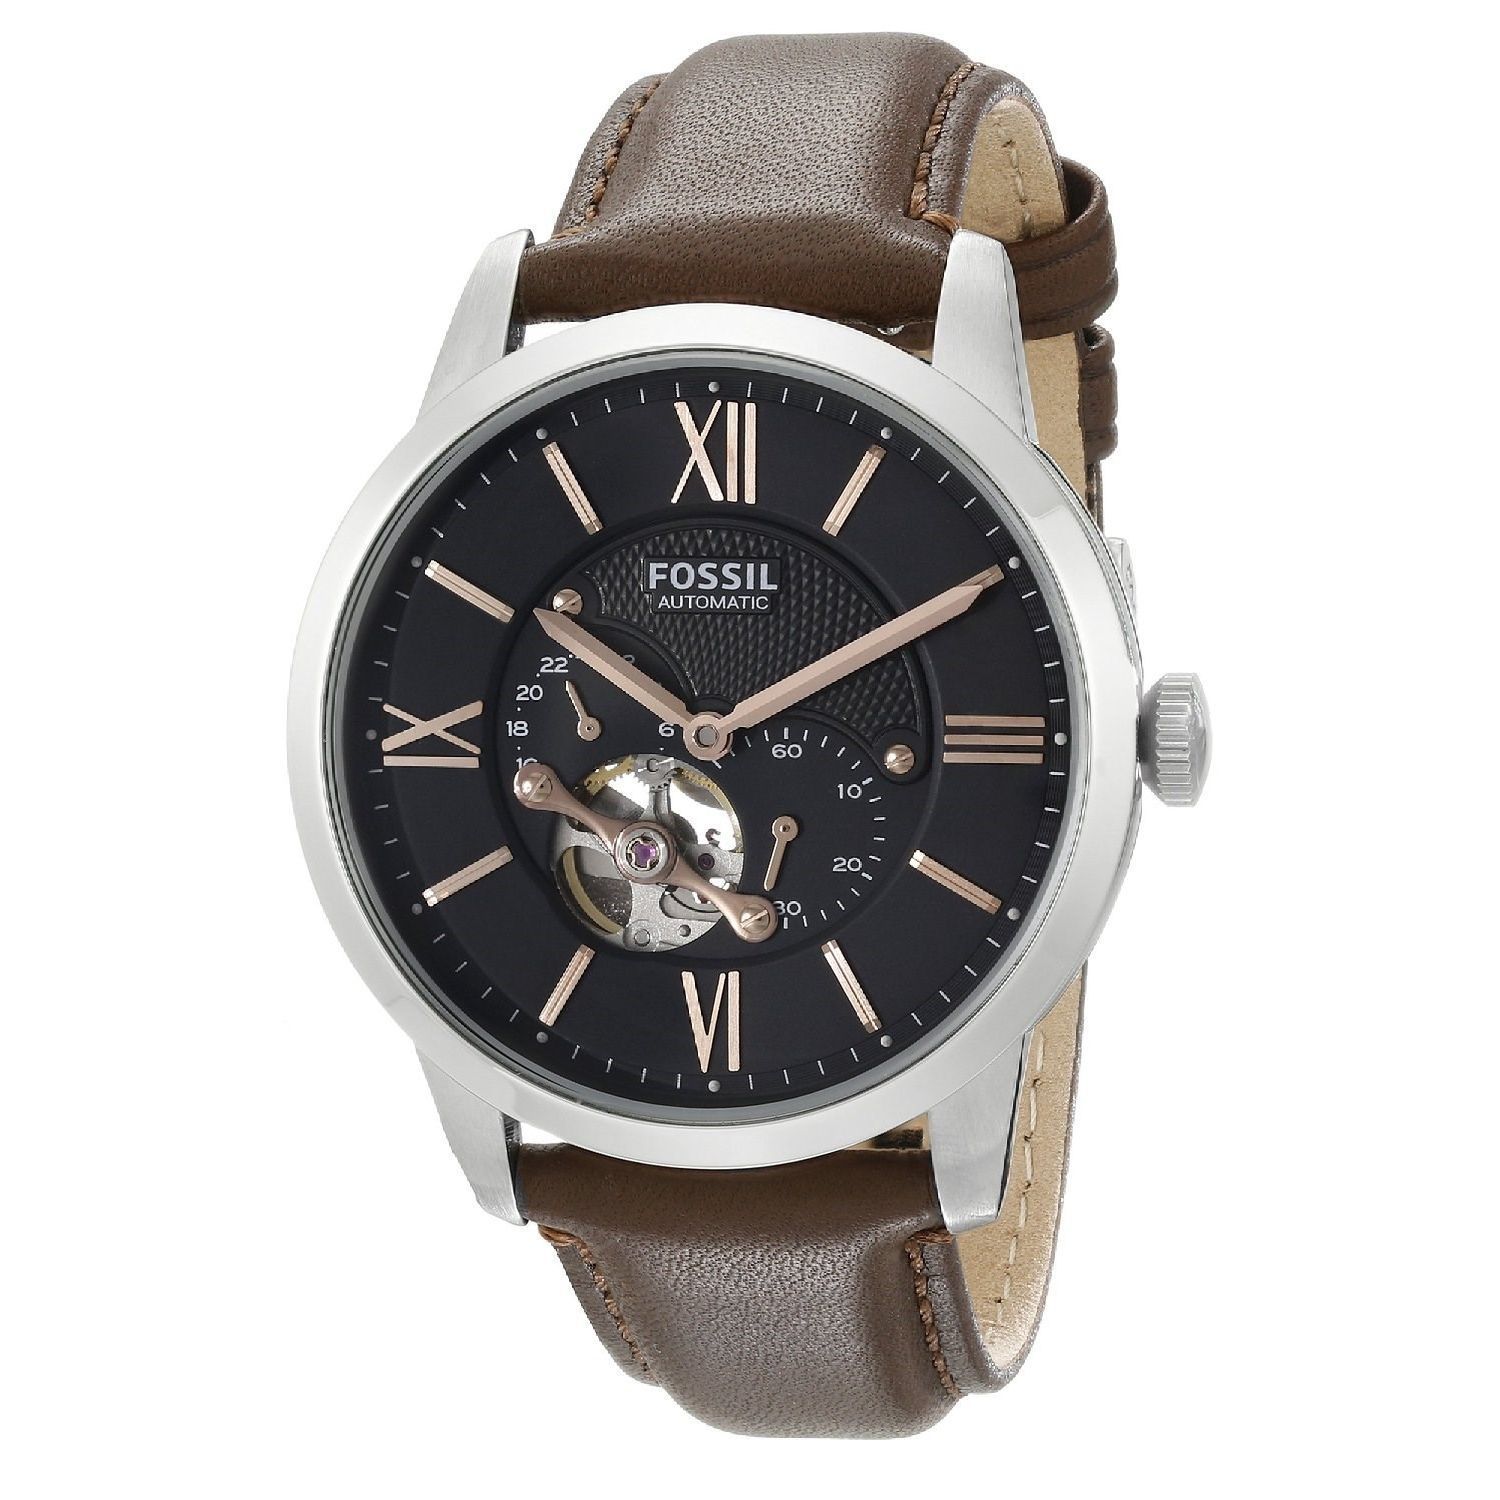 Shop Fossil Men's Townsman Automatic Leather Brown Watch - Free ...